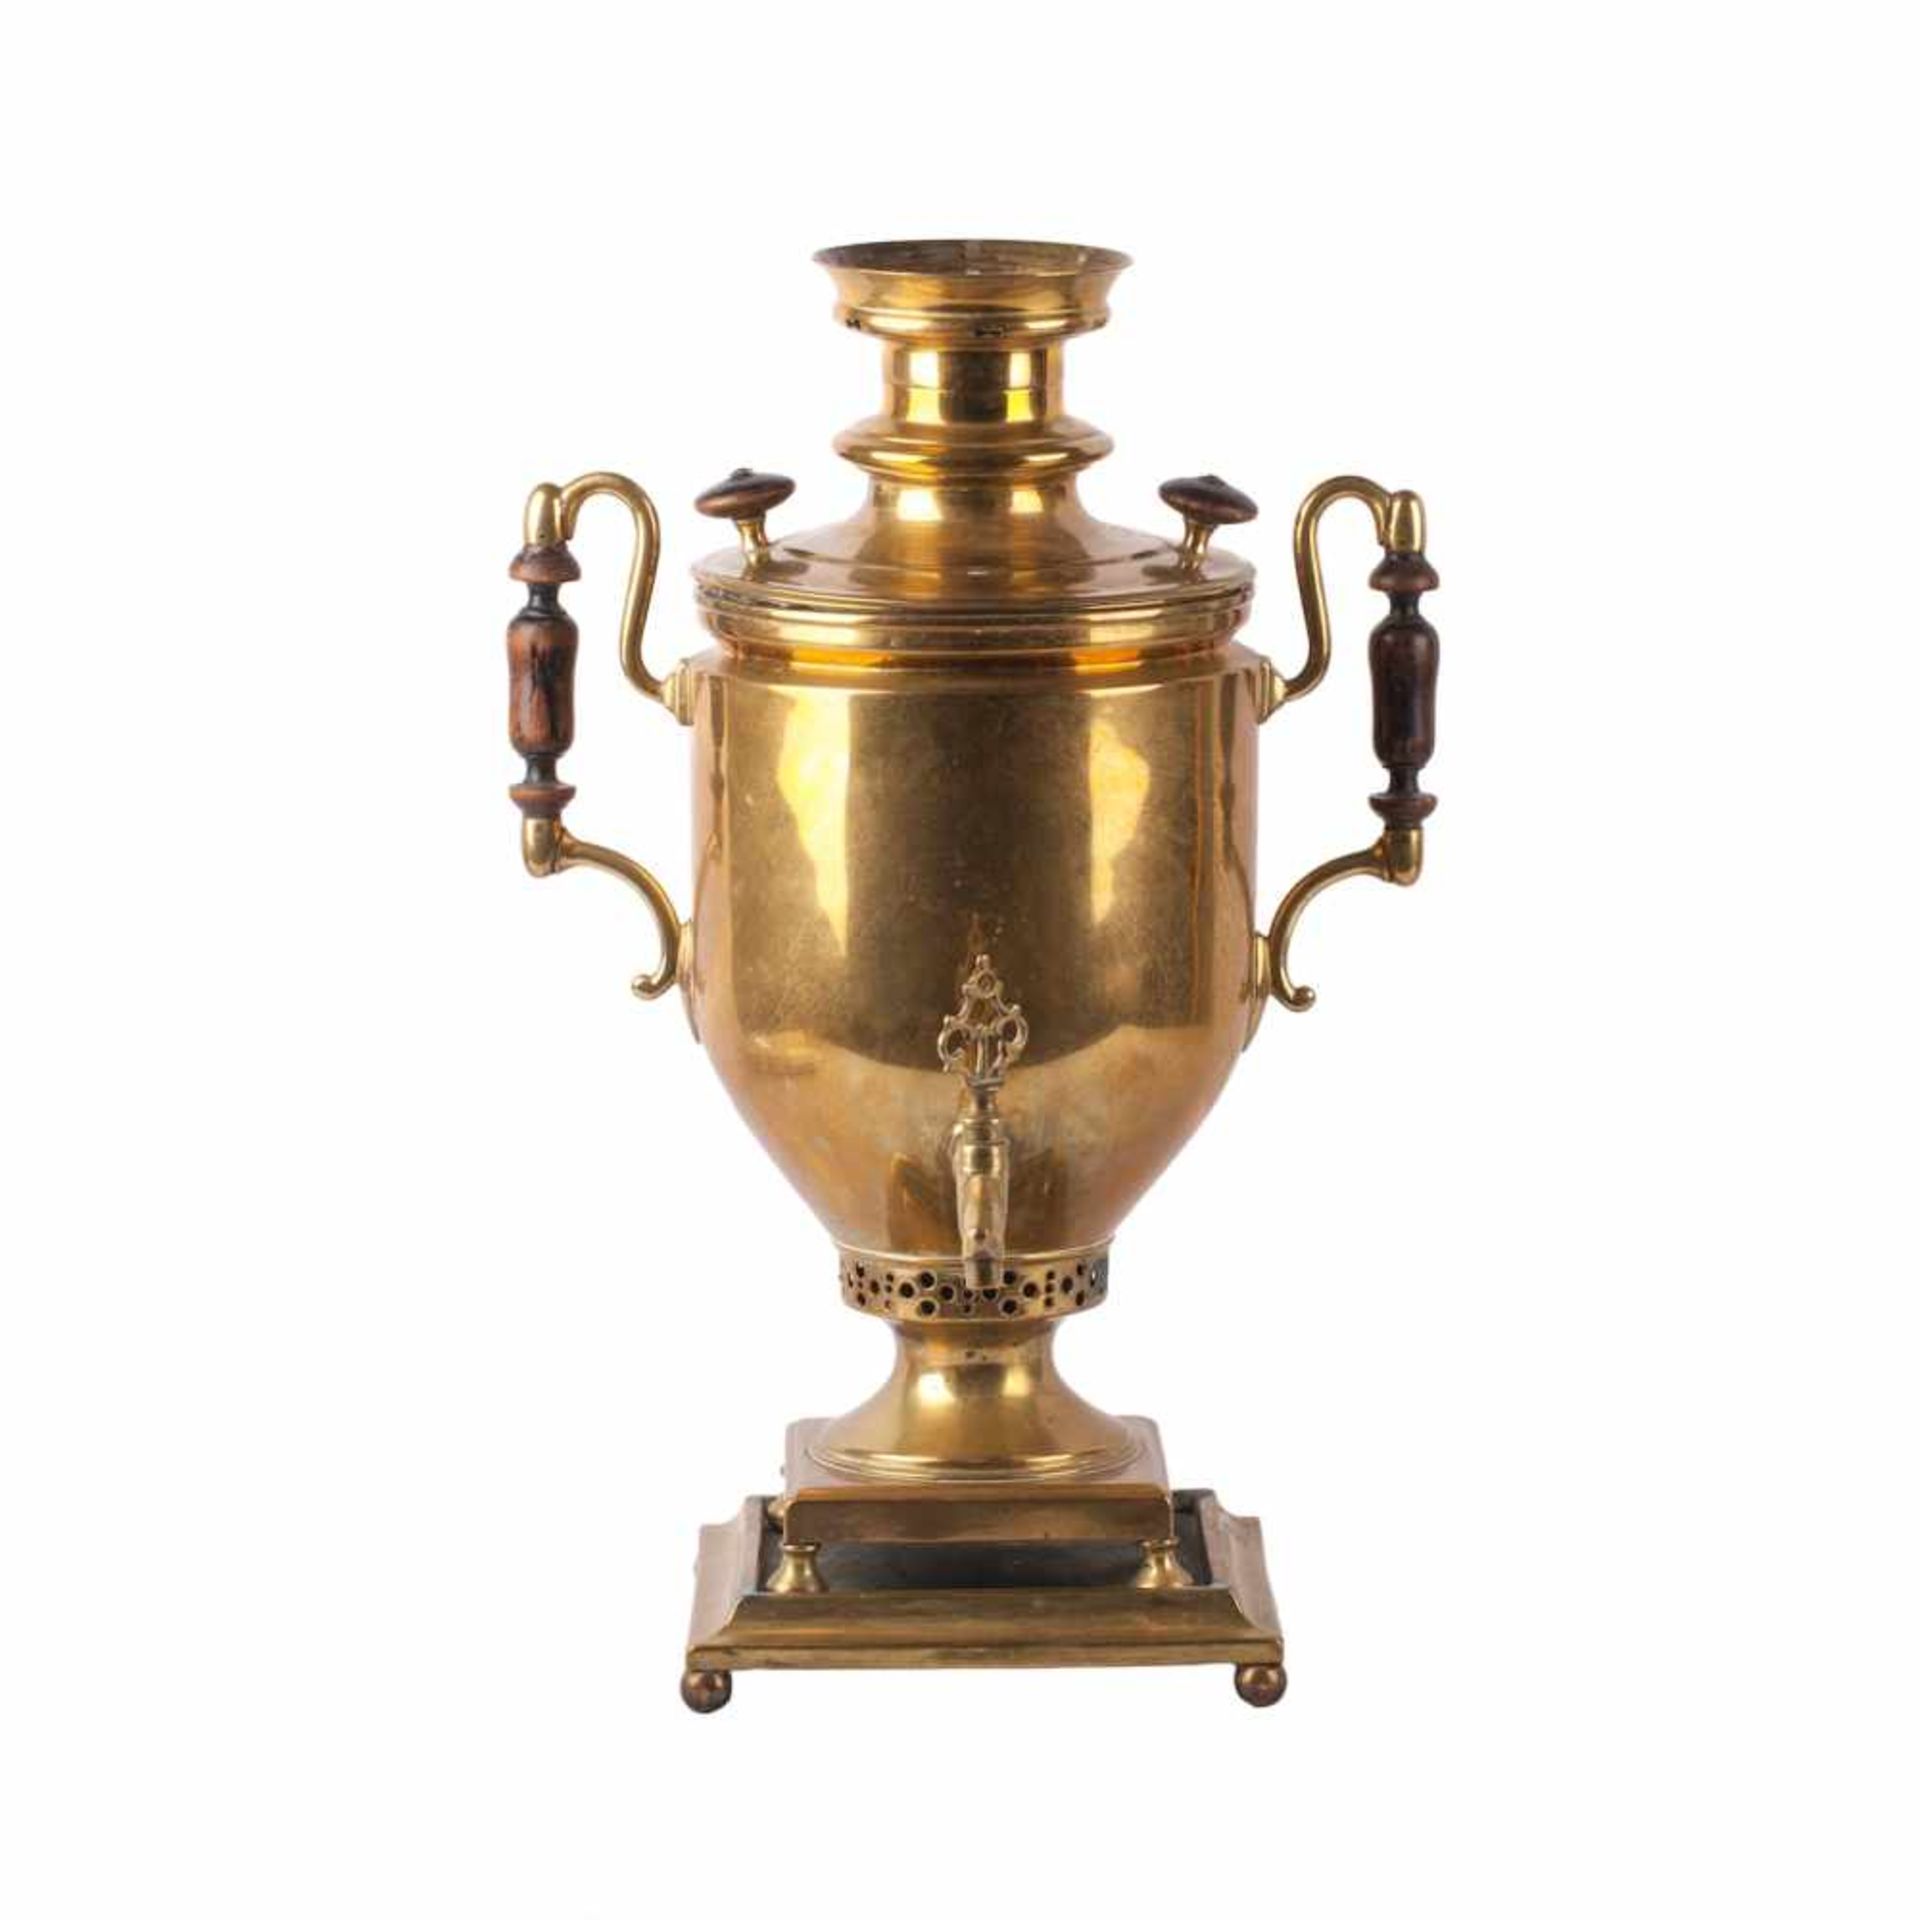 Russian samovar in the shape of a vaseRussian samovar in the shape of a vase. Brass, Russia, 19th